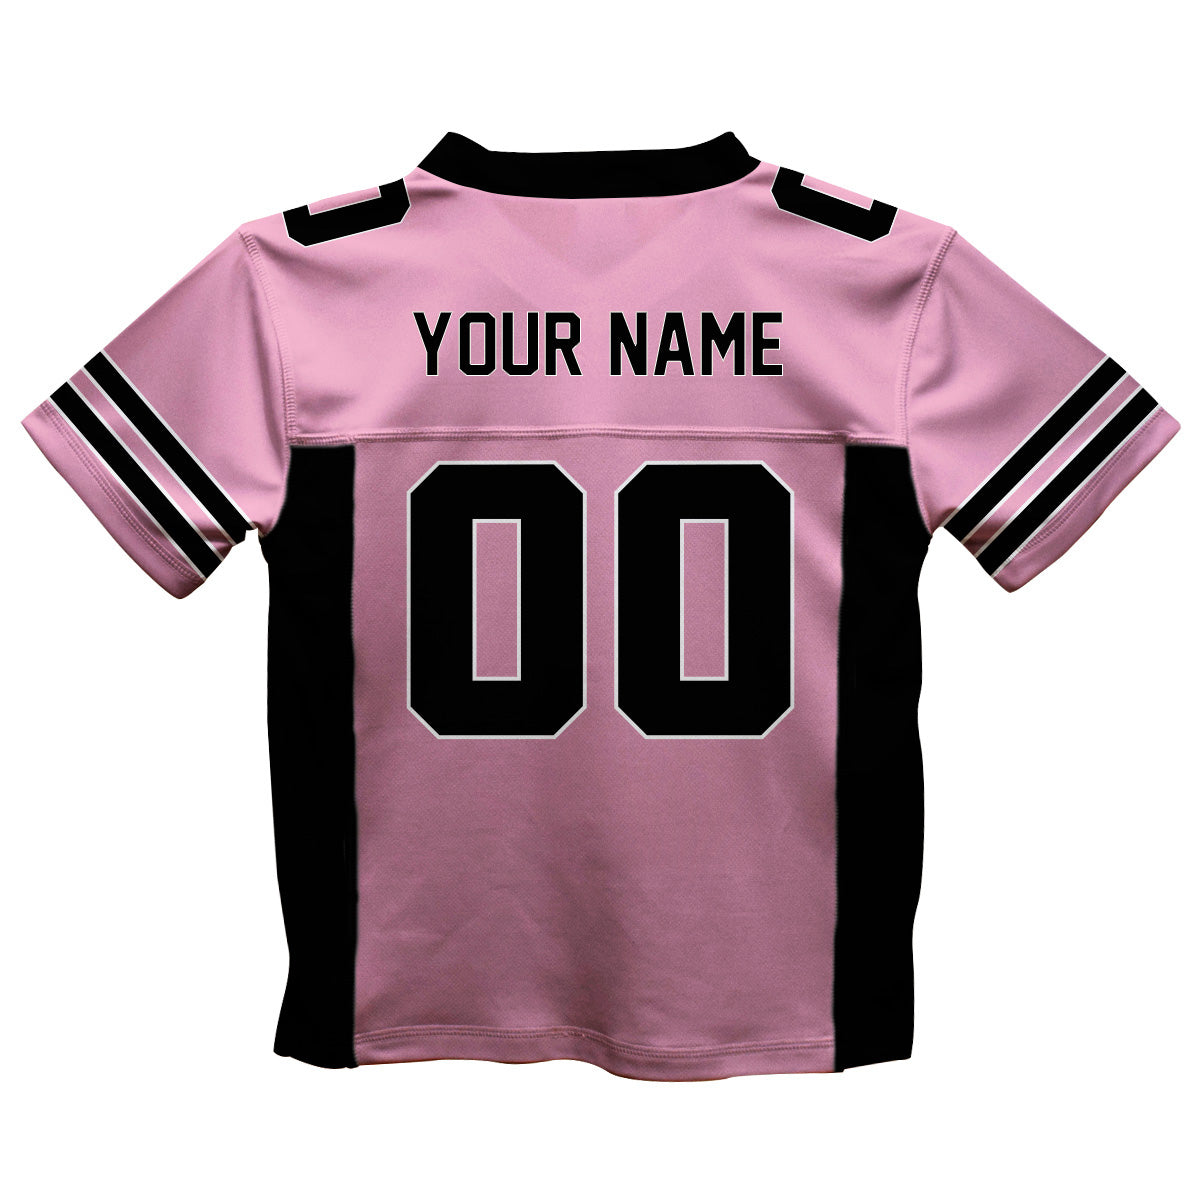 Personalized Name and Number Red and Black Fashion Football T-Shirt - Wimziy&Co.